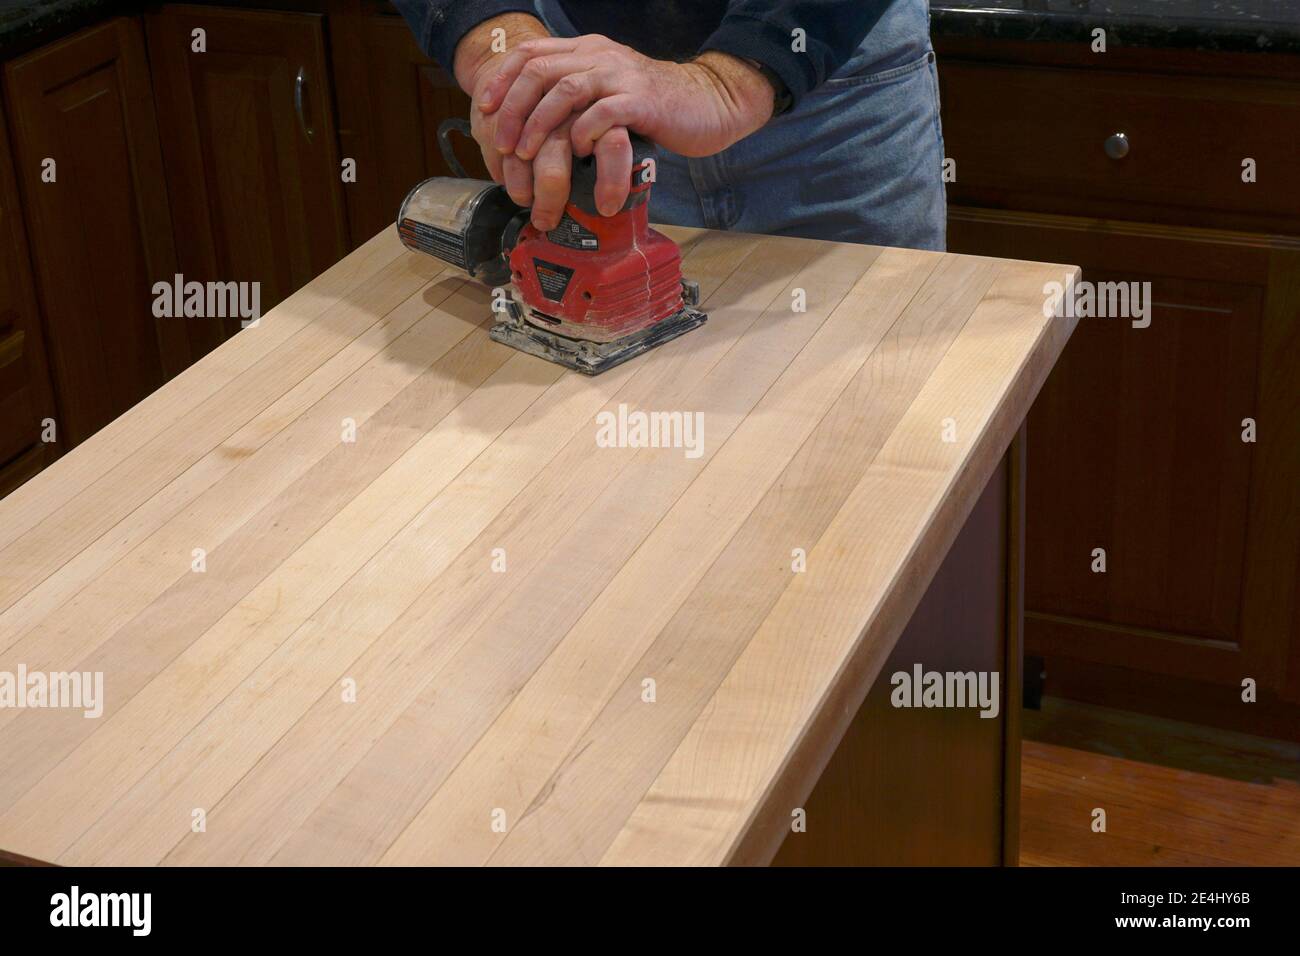 Using an electric sander to refinish a counter top Stock Photo